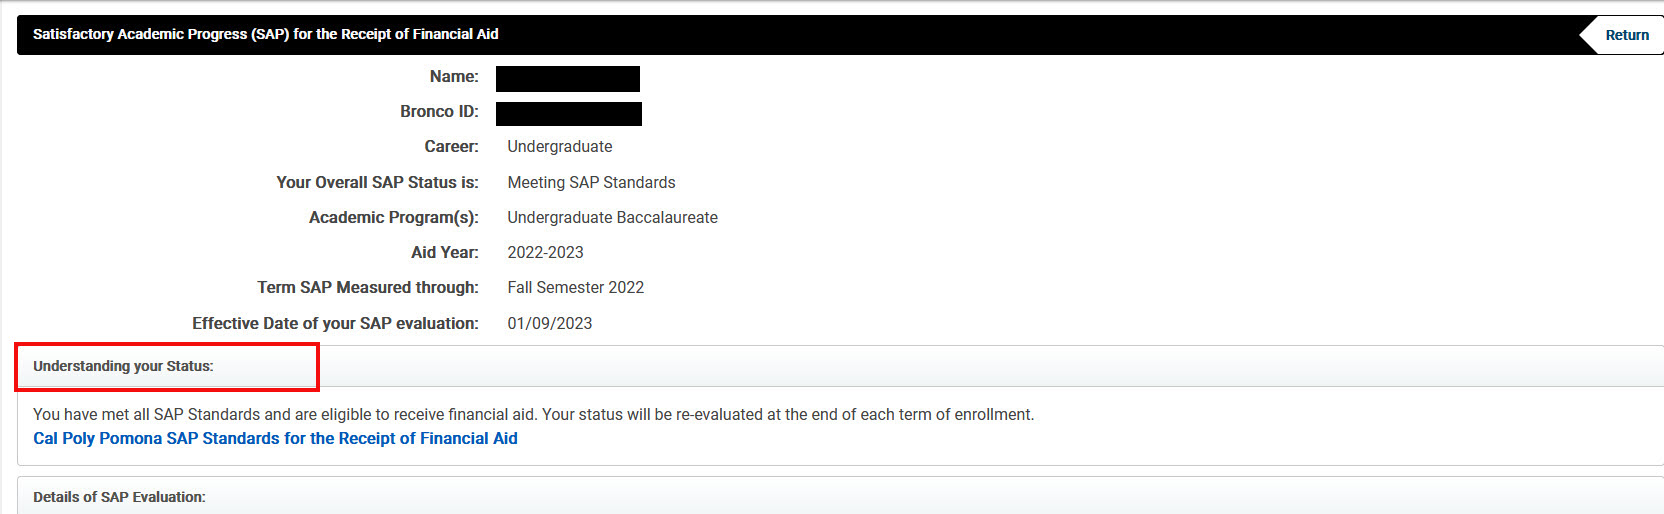 image of Understanding your Status section of the SAP Status Screen